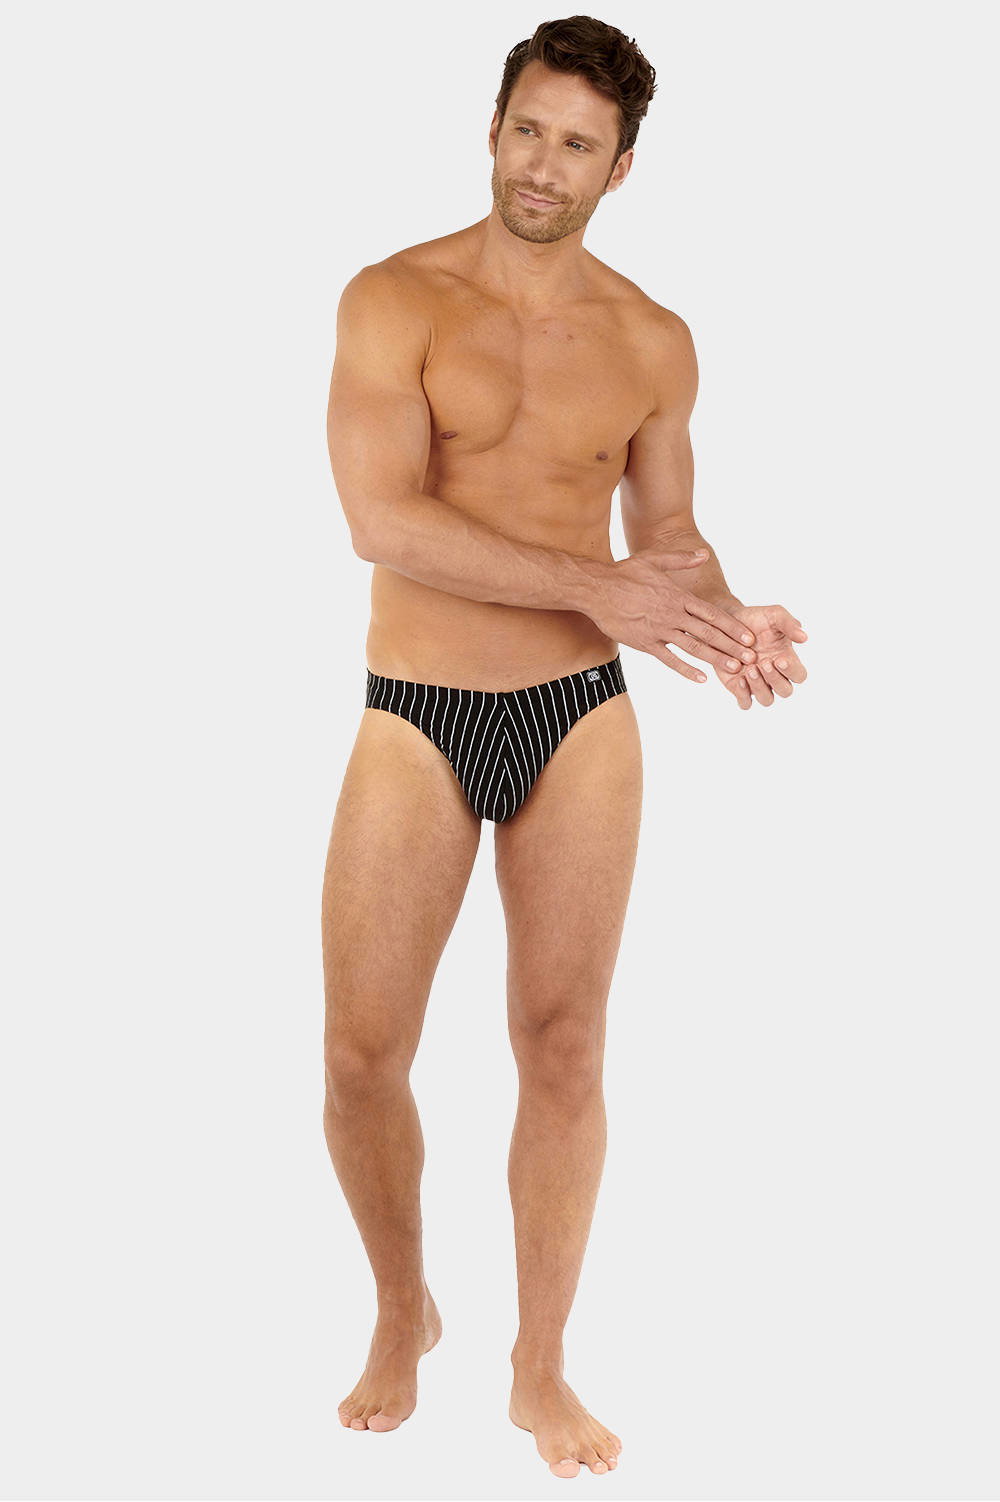 Feelgood underwear for men – waiting for you today on DGU - Dead